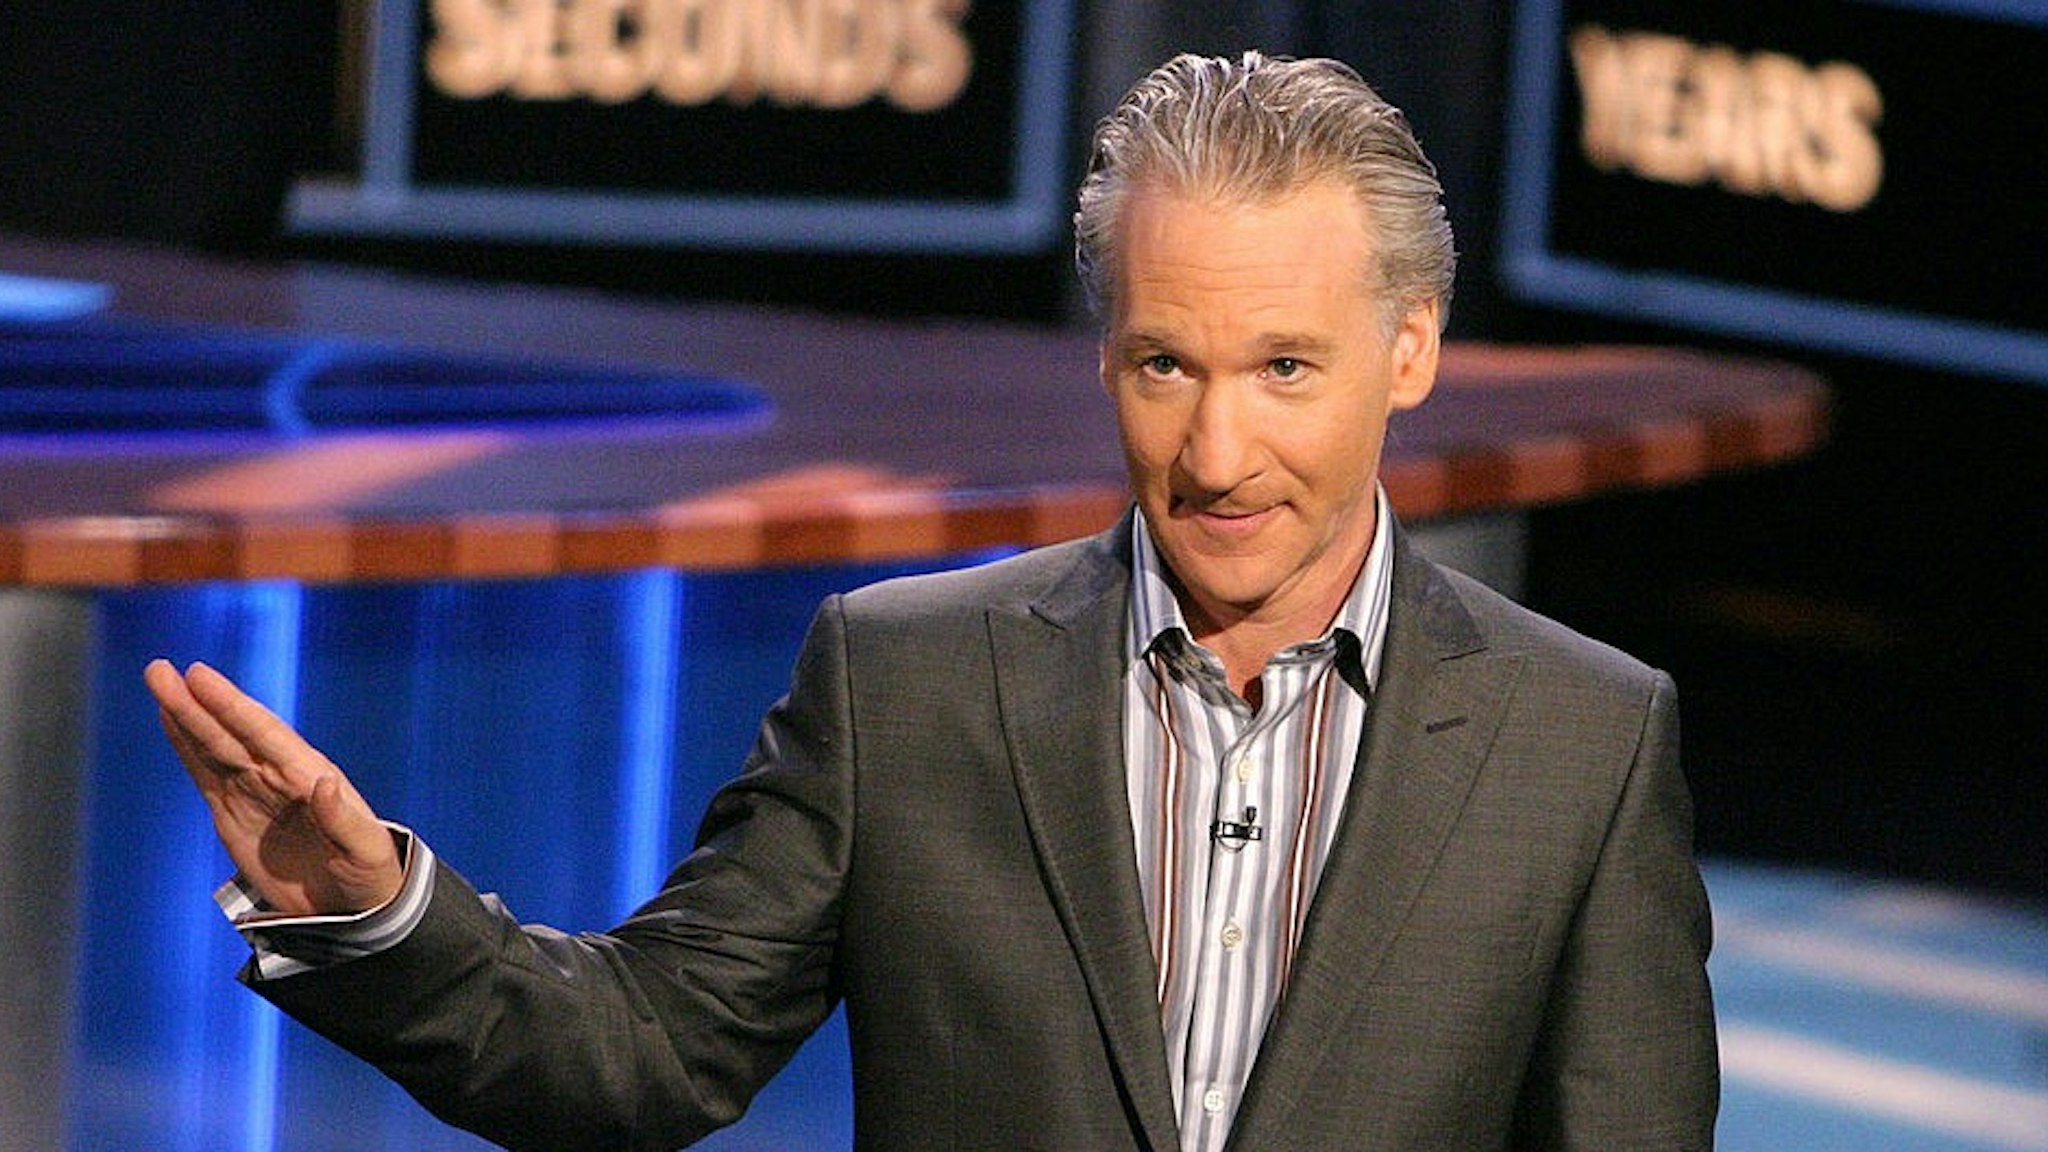 Bill Maher during HBO's Real Time With Bill Maher with Special Guest Governor Gray Davis at CBS Studios in Hollywood, California, United States. ***Exclusive*** (Photo by